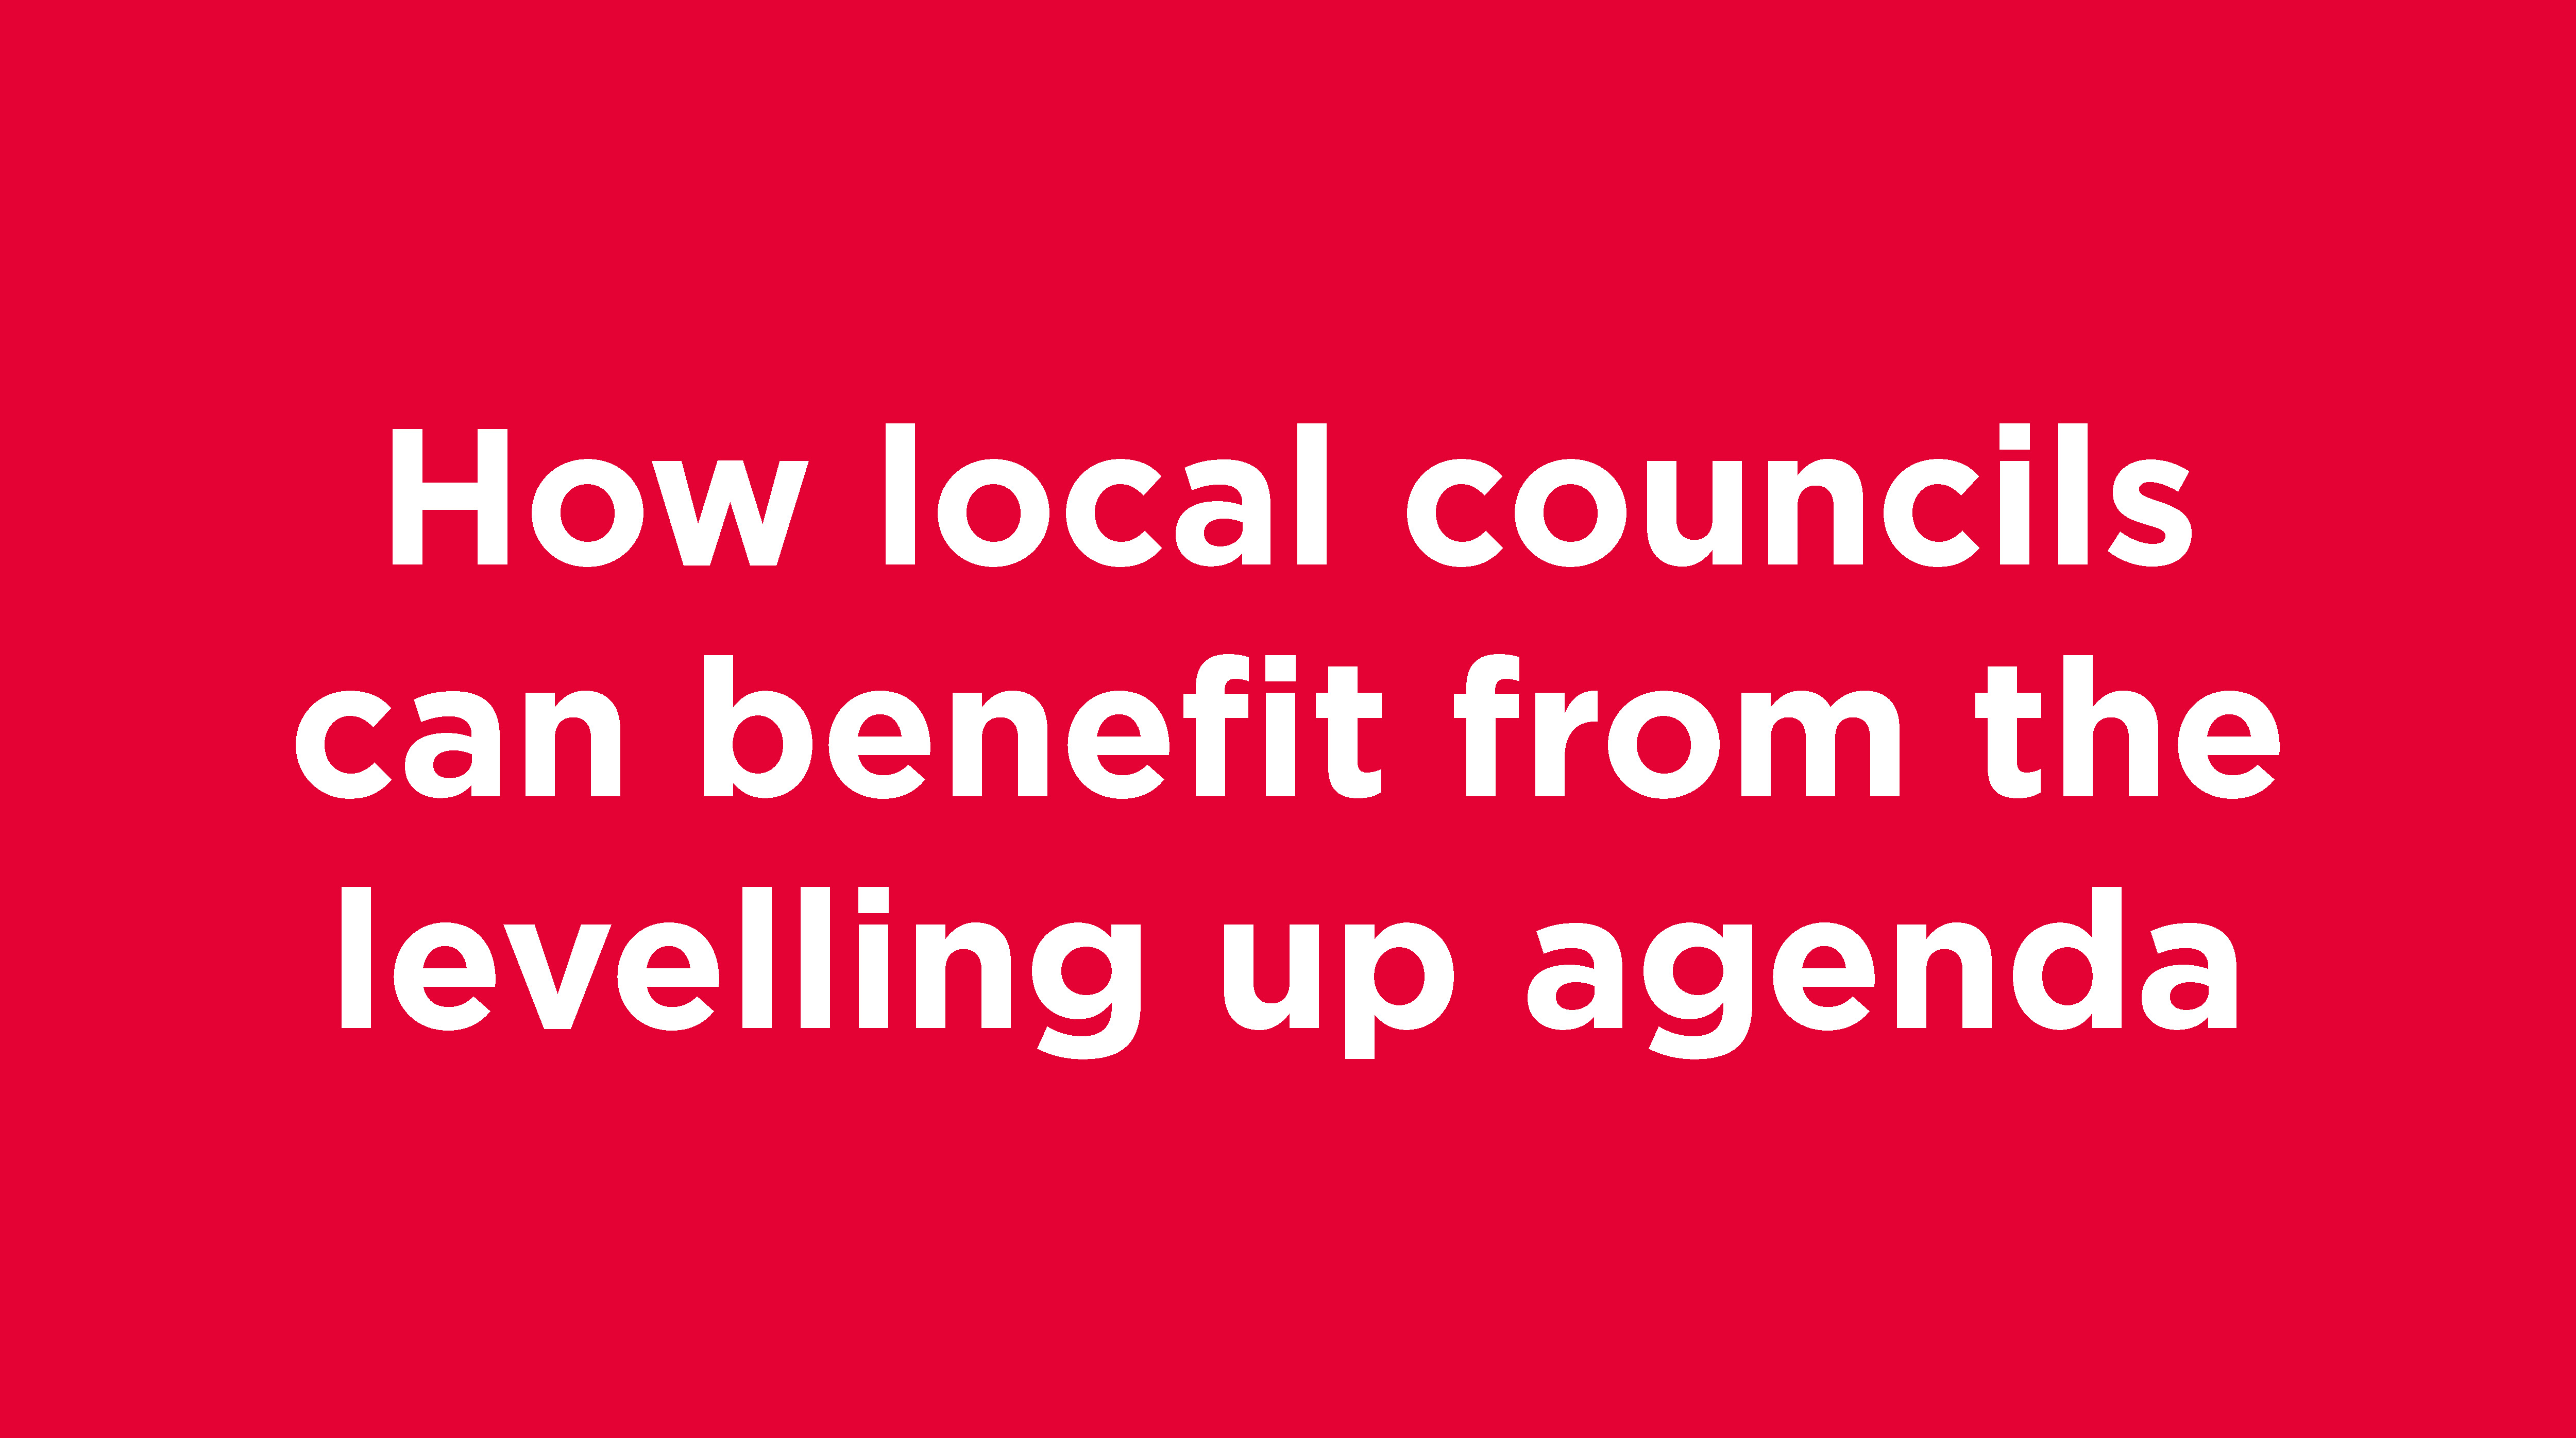 How-local-councils-can-benefit-from-the-levelling-up-agenda